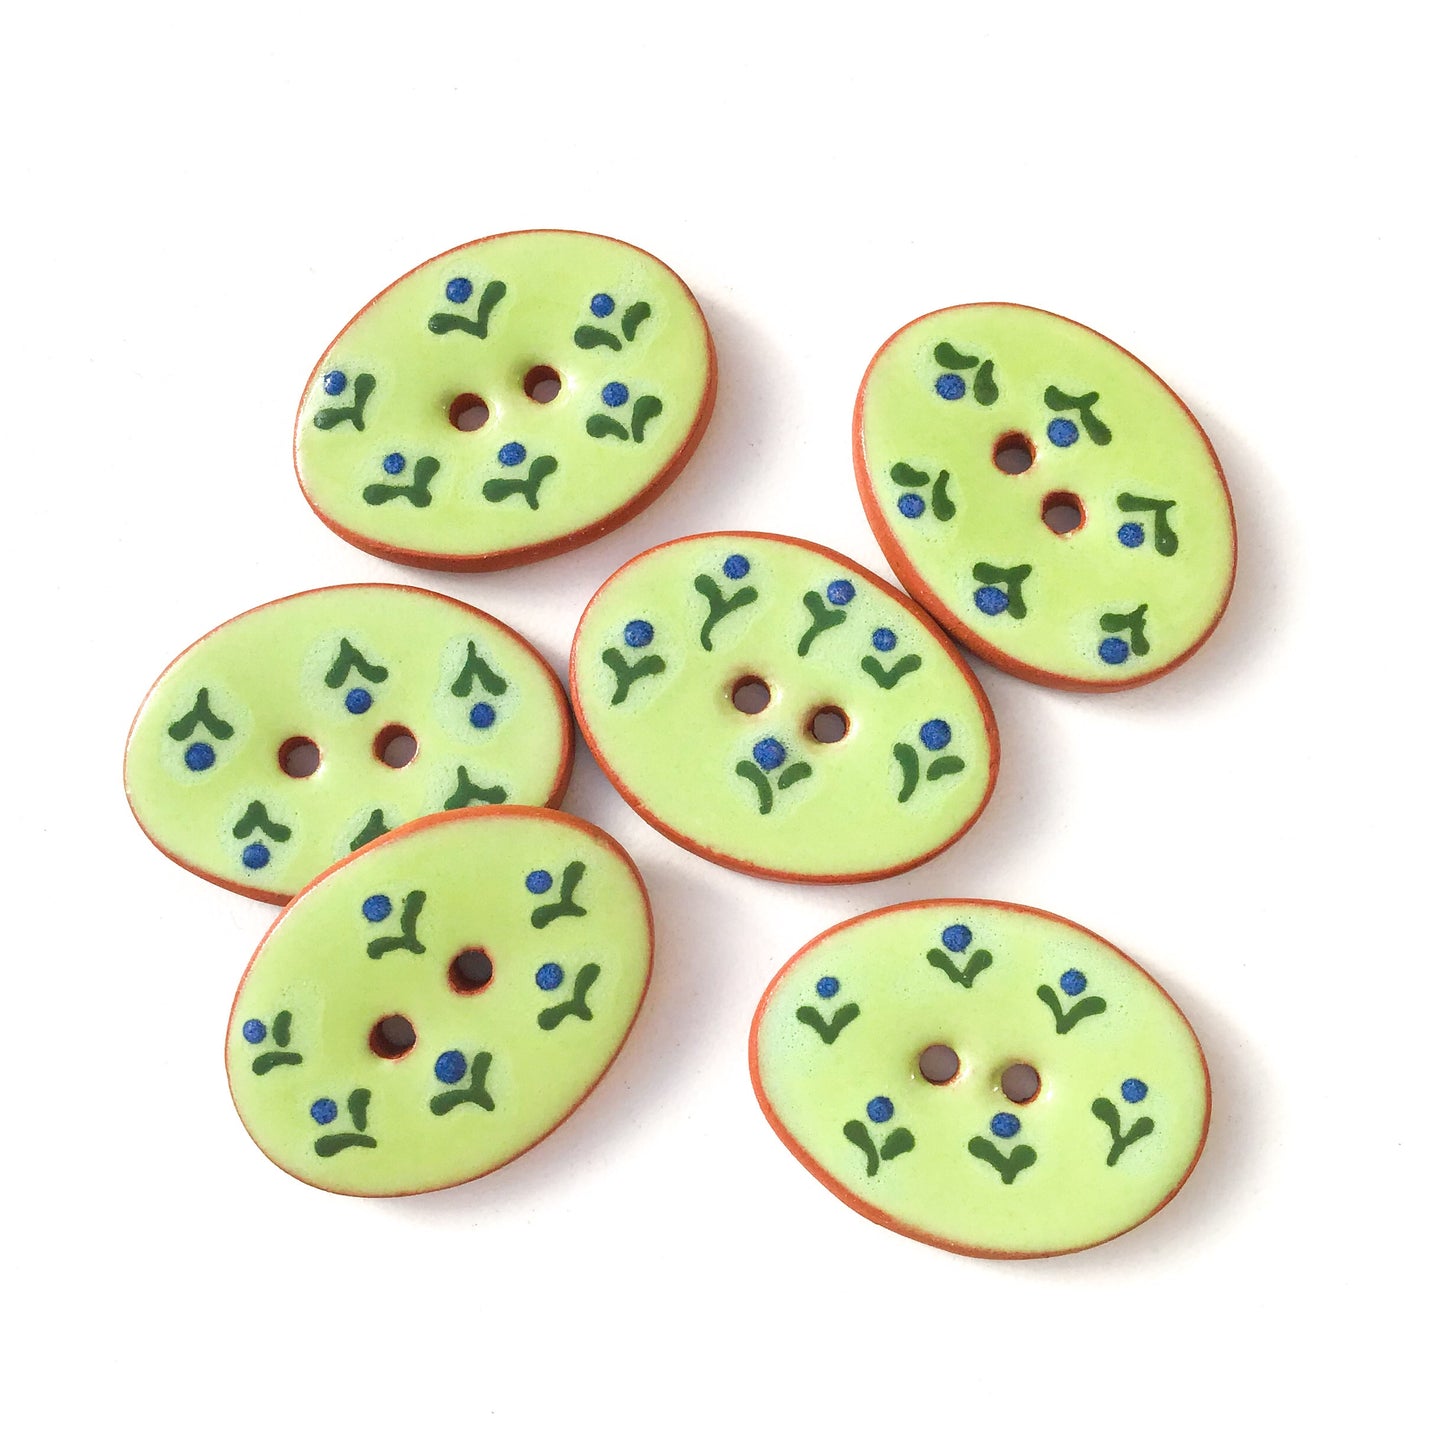 Green Ceramic Buttons with Small Blue Flowers - Oval Clay Buttons - 3/4" x 1 1/16" - 6 Pack (ws-95)